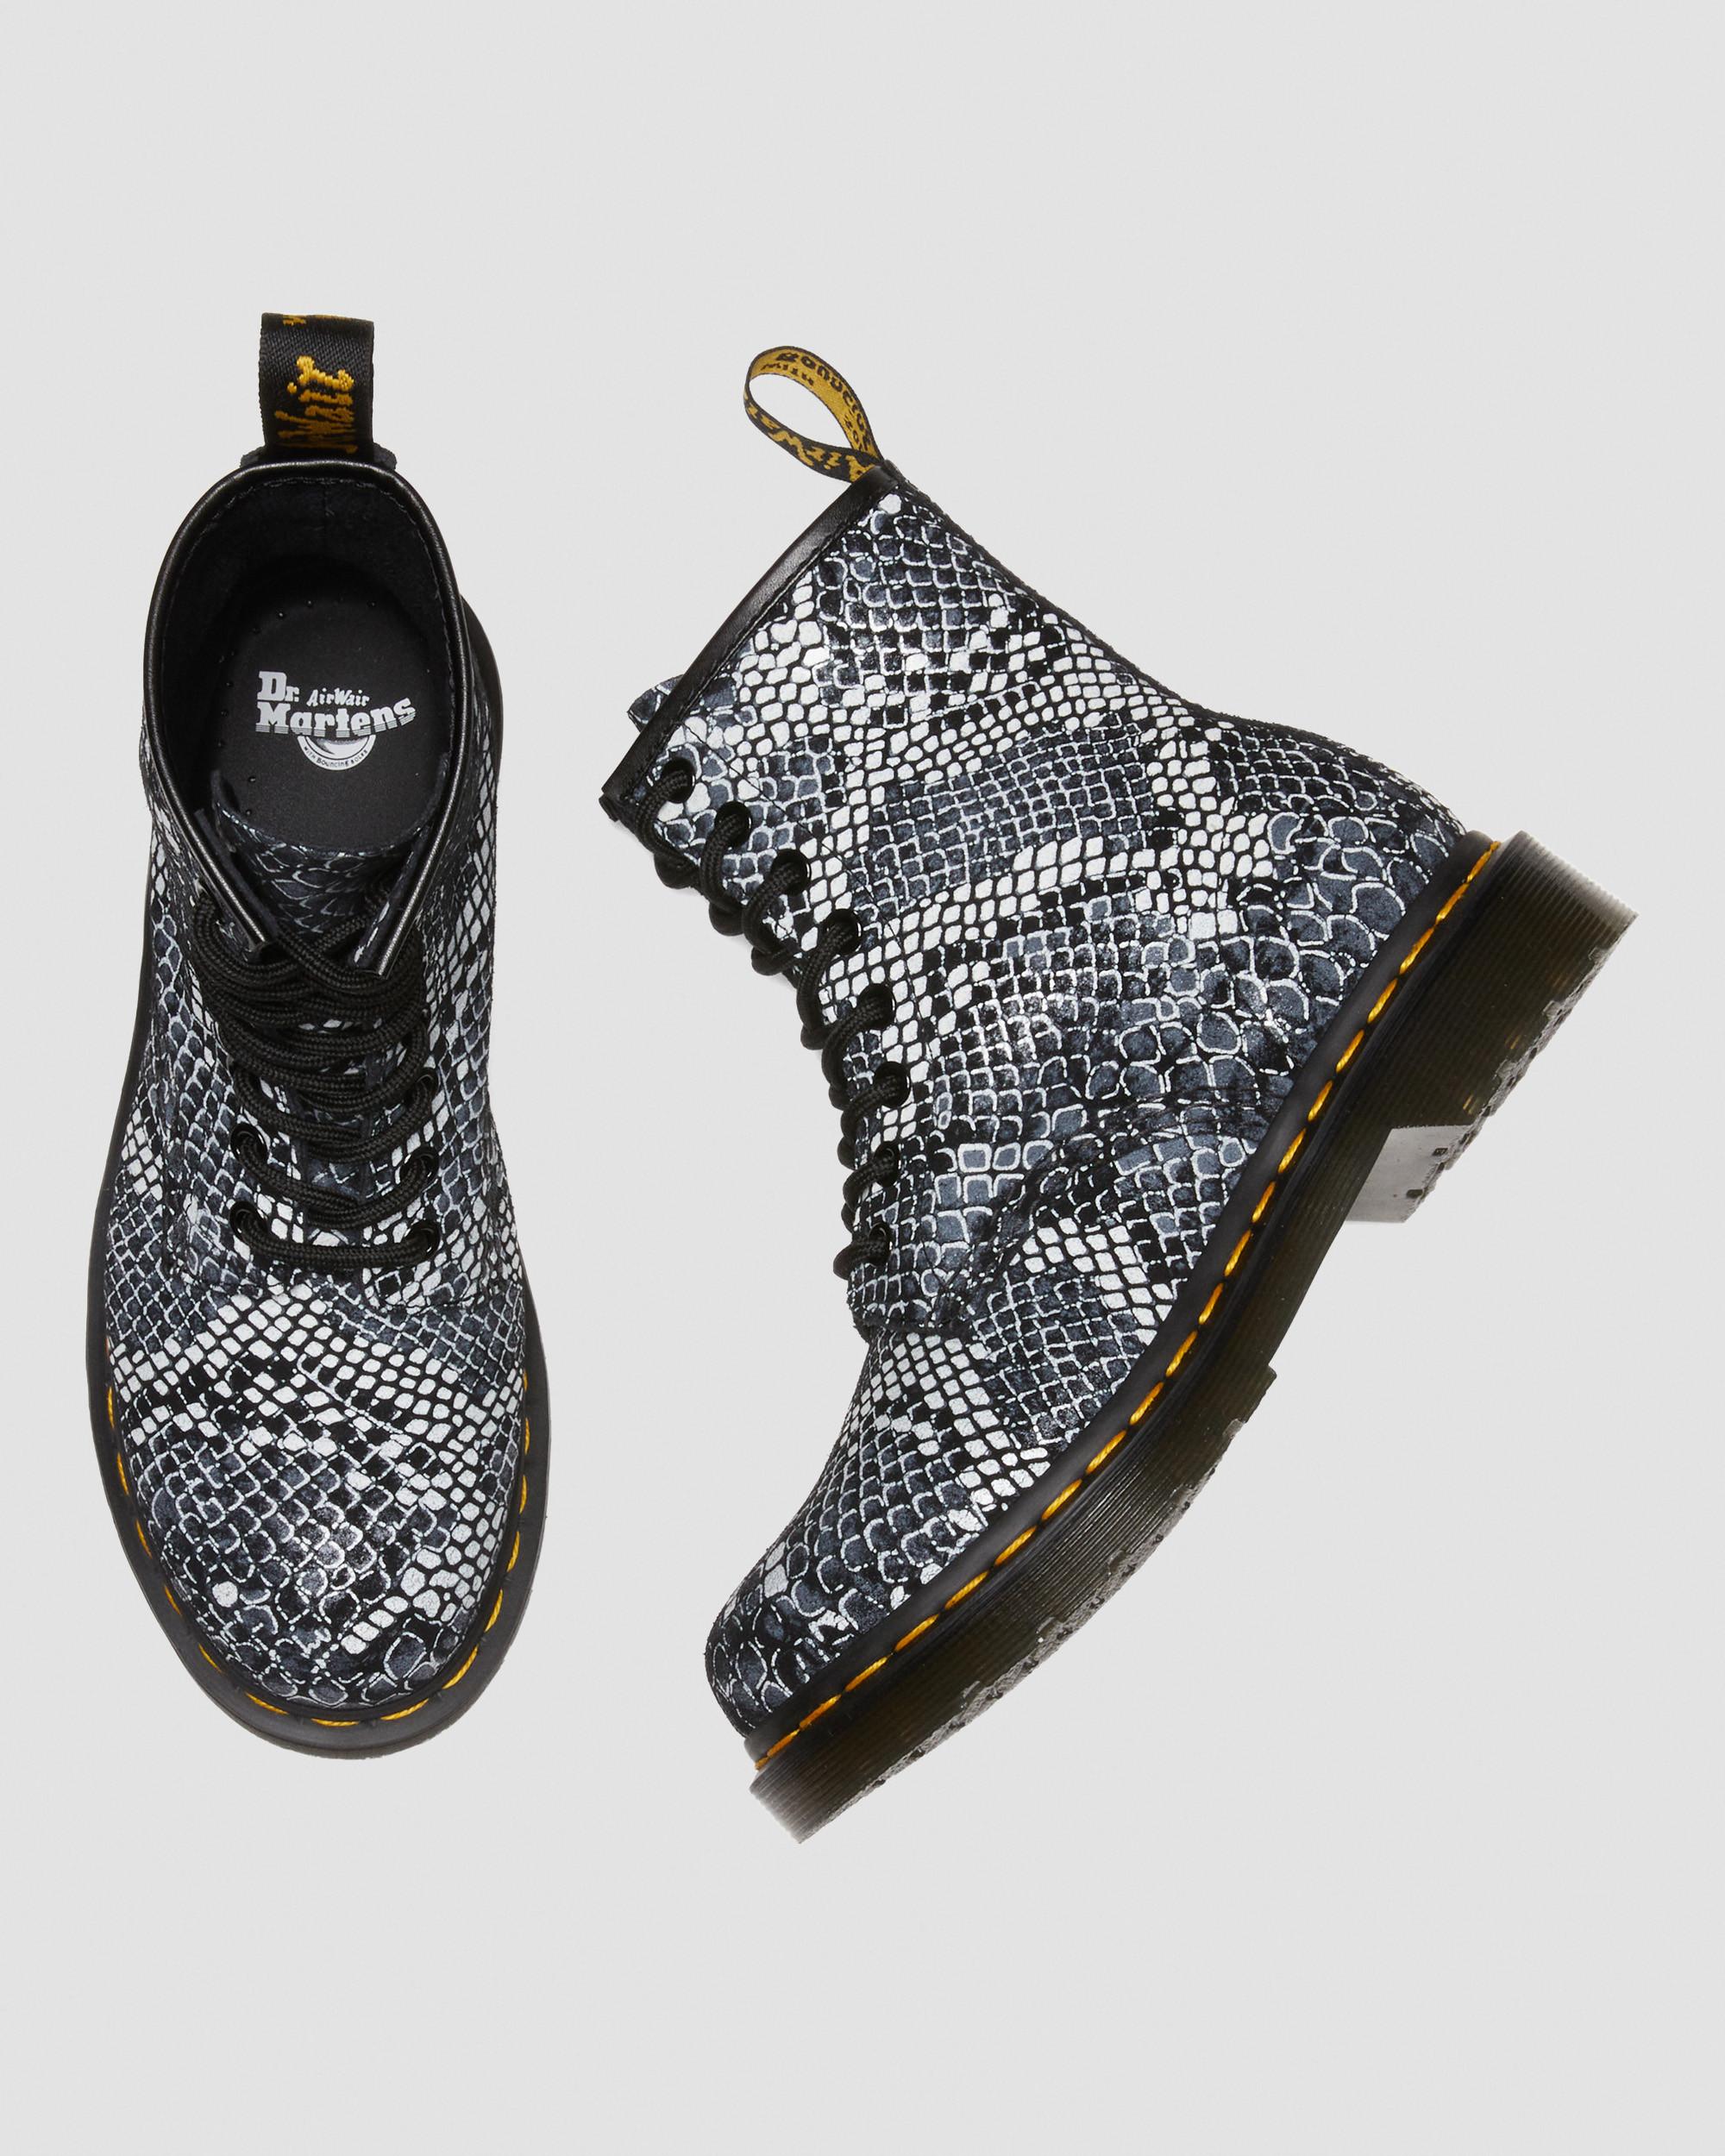 DR MARTENS 1460 Serpent Print Leather Lace Up Boots